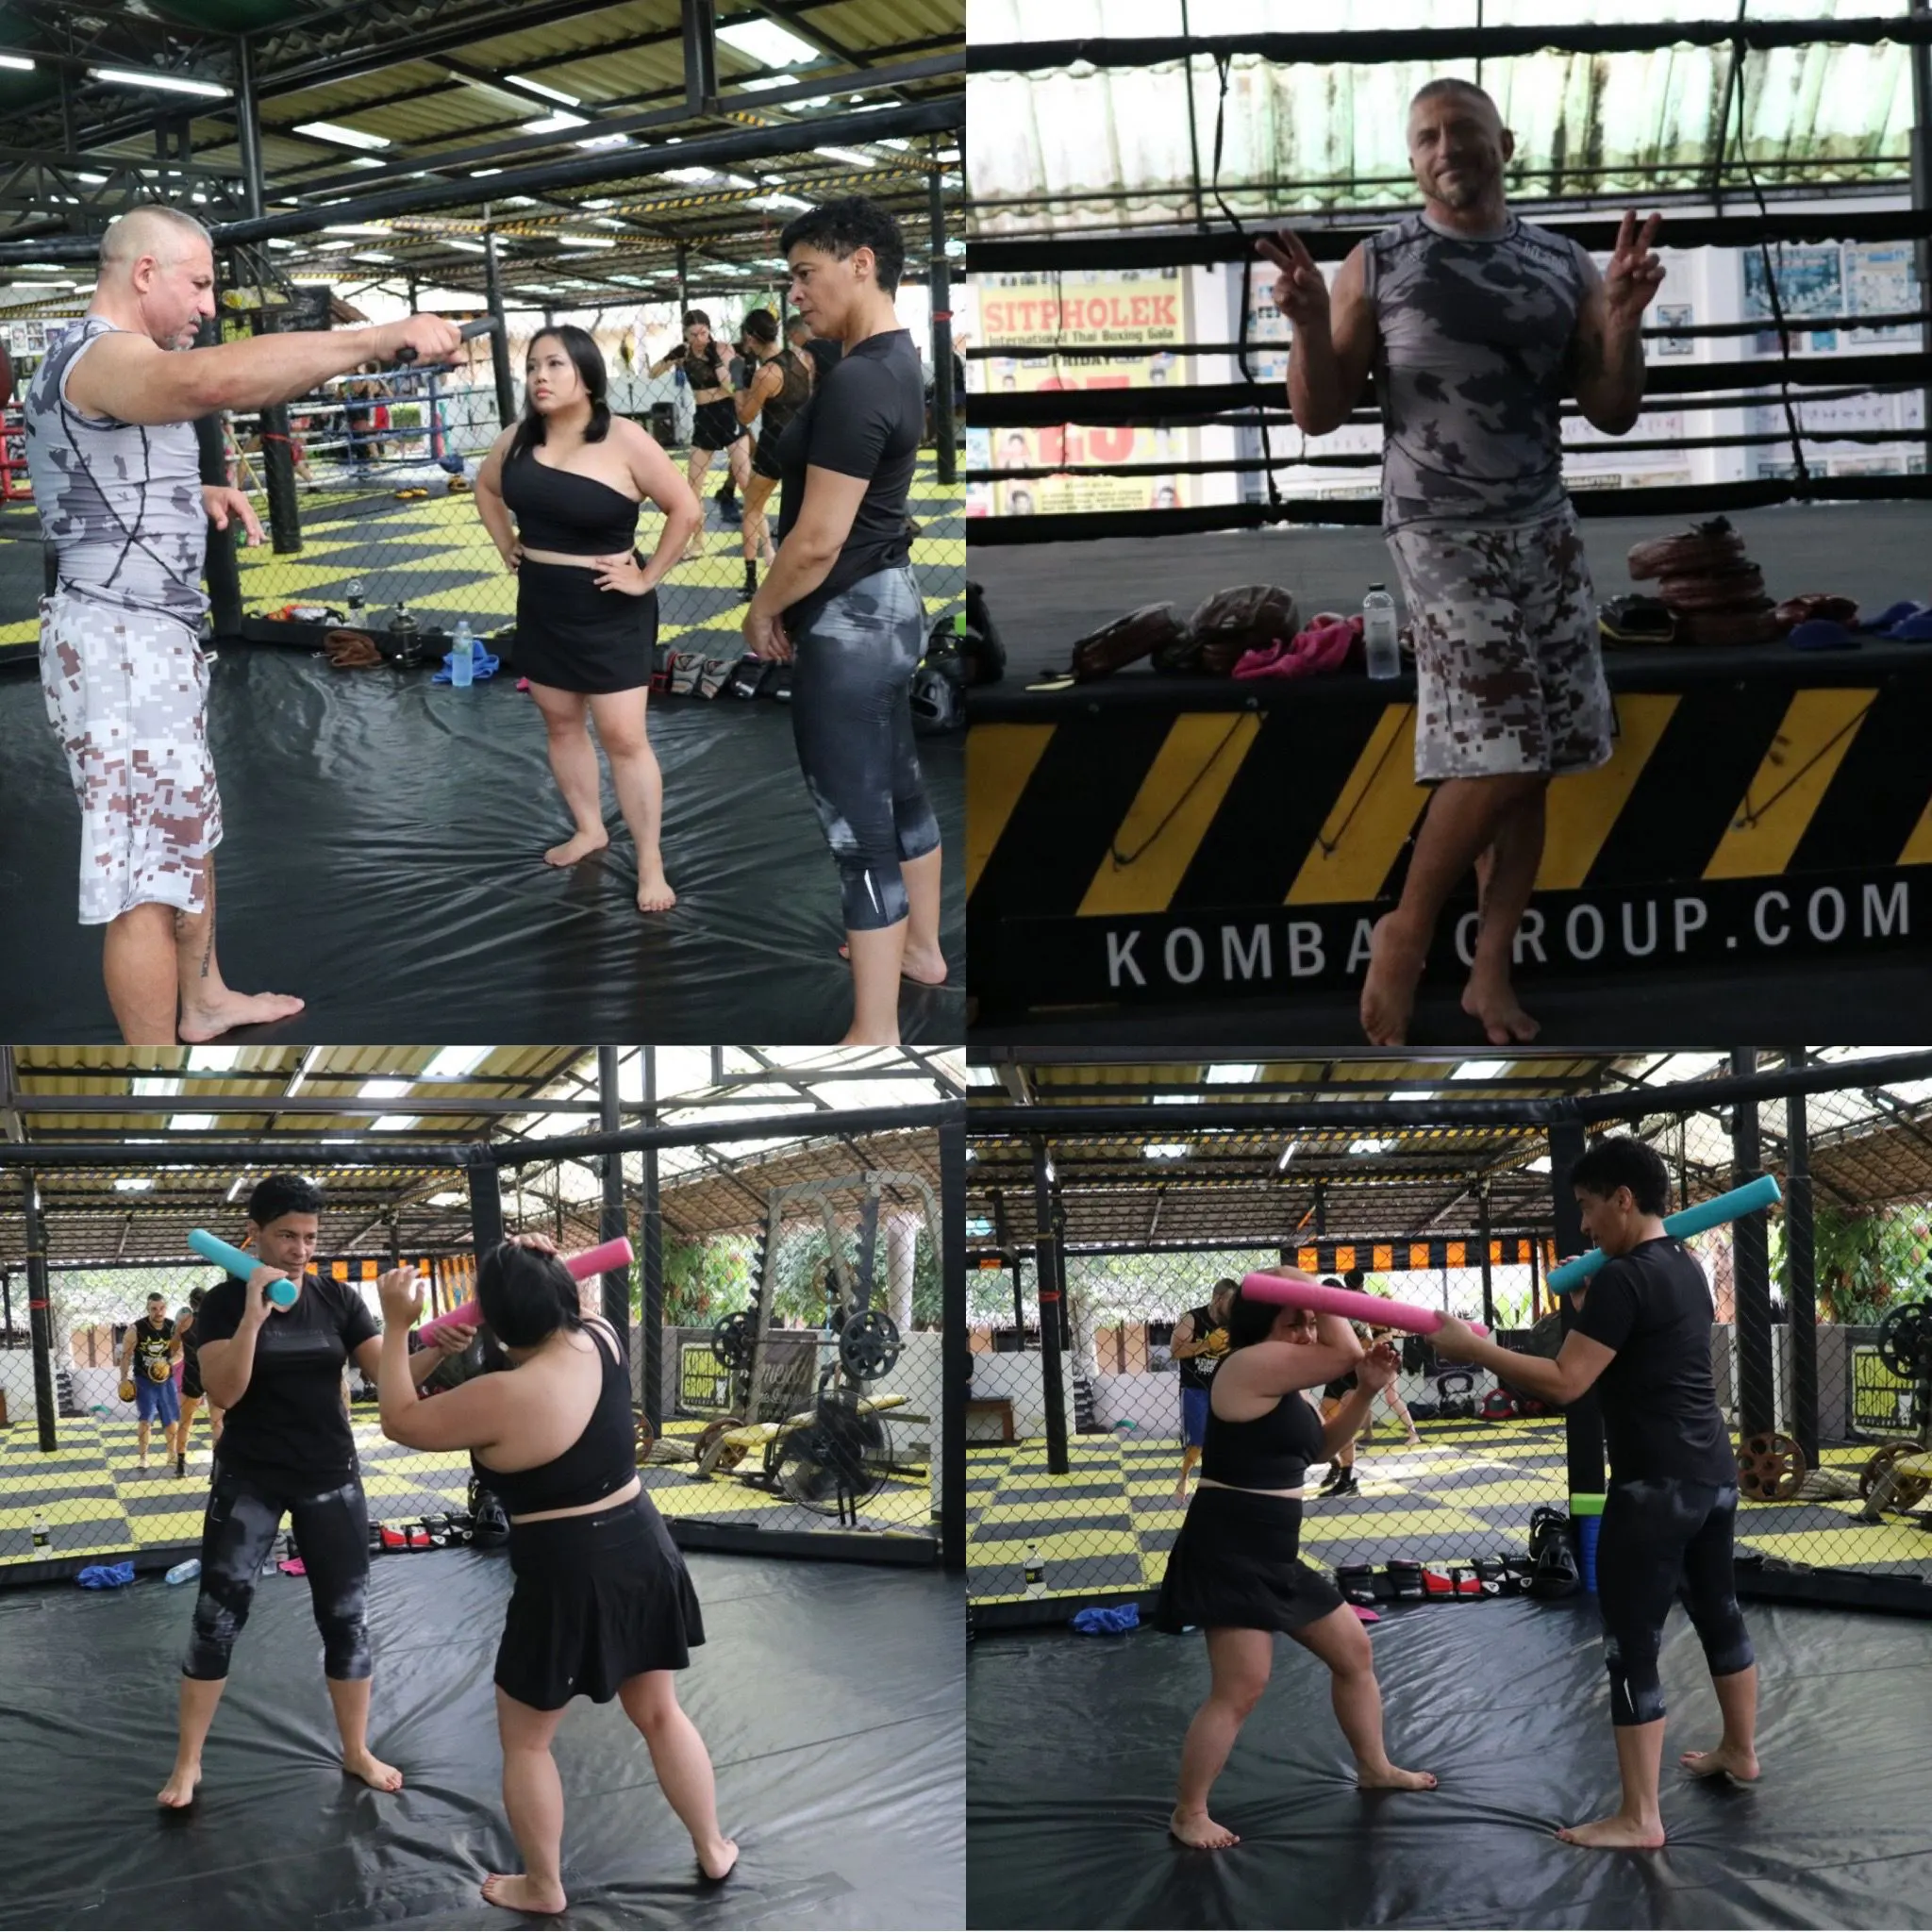 My Journey to Physical and Mental Wellbeing at Kombat Group